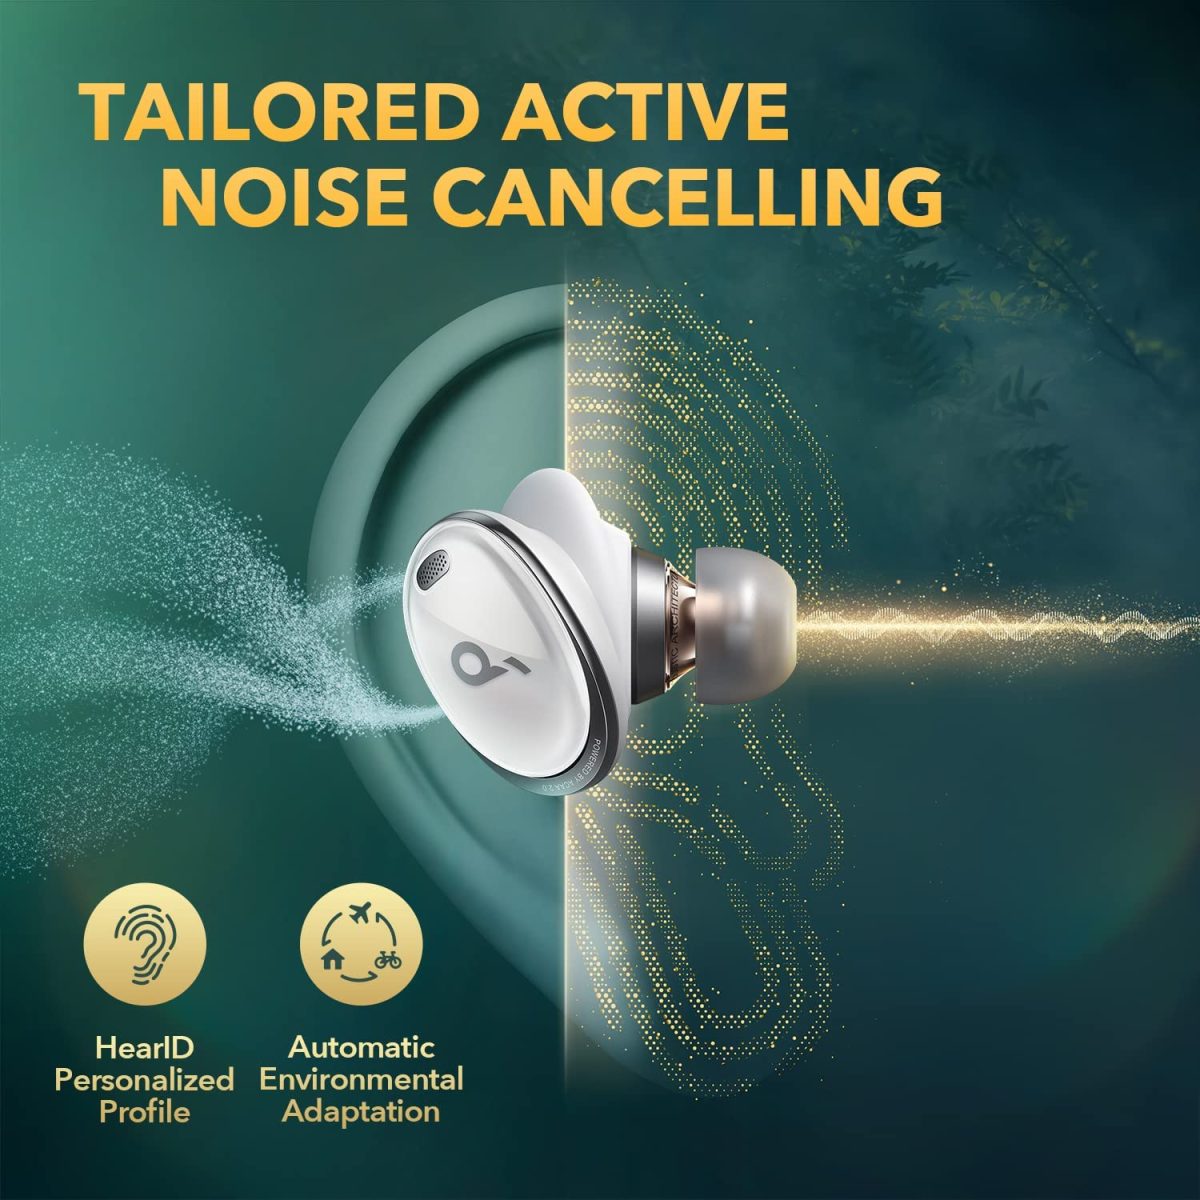 71S0O5H Ntl. Ac Sl1500 Soundcore &Lt;H1 Id=&Quot;Title&Quot; Class=&Quot;A-Size-Large A-Spacing-None&Quot;&Gt;Anker Soundcore Liberty Air 3 Pro True Wireless Earbuds - White&Lt;/H1&Gt; Https://Www.youtube.com/Watch?V=Bguj4K07Ruy &Lt;Ul&Gt; &Lt;Li&Gt;&Lt;B&Gt;Acaa 2.0:  &Lt;/B&Gt;Our Exclusive Coaxial Dual Driver Technology Delivers High And Low Frequency Sound Directly To Your Ear Without Interference. Its Wide Soundstage Is Detailed And Spacious, Bass Has A Deep Punch, Mids Are Luscious, And Treble Sparkles.&Lt;/Li&Gt; &Lt;Li&Gt;&Lt;B&Gt;Personalized Noise Cancelling:  &Lt;/B&Gt;Standard Noise Cancelling Only Adjusts Noise Based On Data. Hearid Anc Analyzes Your Ears And Level Of In-Ear Pressure To Create A Tailored Profile That Optimizes Noise Reduction And Reduces External Sound To Suit Your Ears.&Lt;/Li&Gt; &Lt;Li&Gt;&Lt;B&Gt;Fusion Comfort Fit:  &Lt;/B&Gt;Liberty 3 Pro’s Earbuds Have A Triple-Point Ergonomic Shape And Built-In Ear Pressure Relief For All-Day Comfort. 4 Sizes Of Liquid Silicone Ear Tips And Flexible Ear Wings Ensure You Get A Strong Seal And Secure Grip.&Lt;/Li&Gt; &Lt;Li&Gt;&Lt;B&Gt;Up To 32 Hours Of Playtime:  &Lt;/B&Gt;Enjoy Up To 8 Hours Of Music From A Single Charge, Plus Get 3 Full Charges From The Compact Charging Case To Extend The Playtime Even Further. Recharge The Case Via Usb-C Cable Or Wireless Charger.&Lt;/Li&Gt; &Lt;/Ul&Gt; &Lt;H5&Gt;Warranty: Anker Product Warranty&Lt;/H5&Gt; &Lt;Pre&Gt;&Lt;B&Gt;We Also Provide International Wholesale And Retail Shipping To All Gcc Countries: Saudi Arabia, Qatar, Oman, Kuwait, Bahrain.&Lt;/B&Gt;&Lt;/Pre&Gt; Earbuds Anker Soundcore Liberty Air 3 Pro True Wireless Earbuds - White